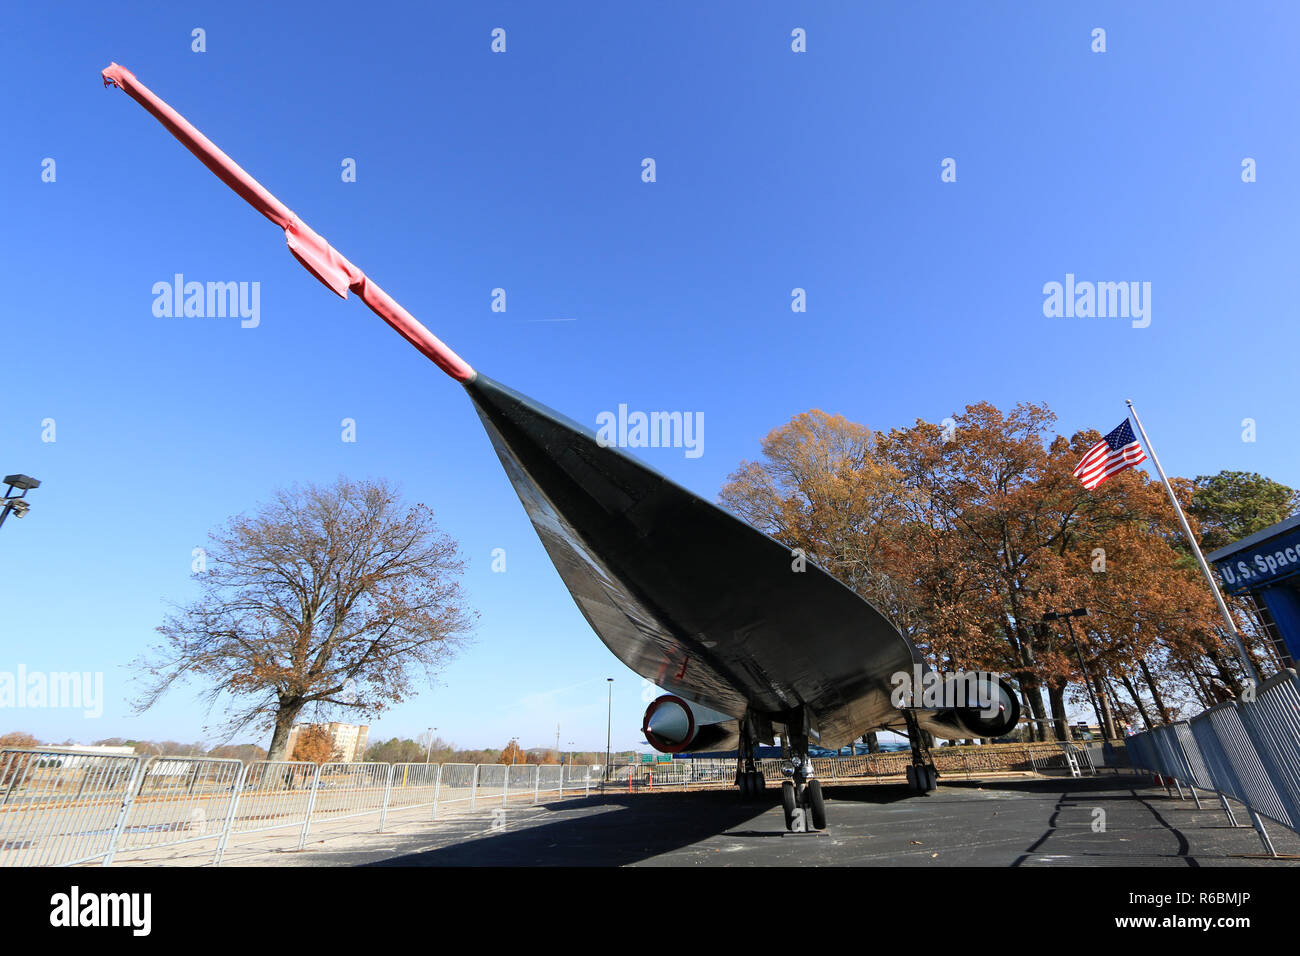 Lockheed SR-71 'Blackbird' Mach 3+ strategic reconnaissance aircraft at display in front of the main entrance of the U.S. Rocket and Space Center Stock Photo